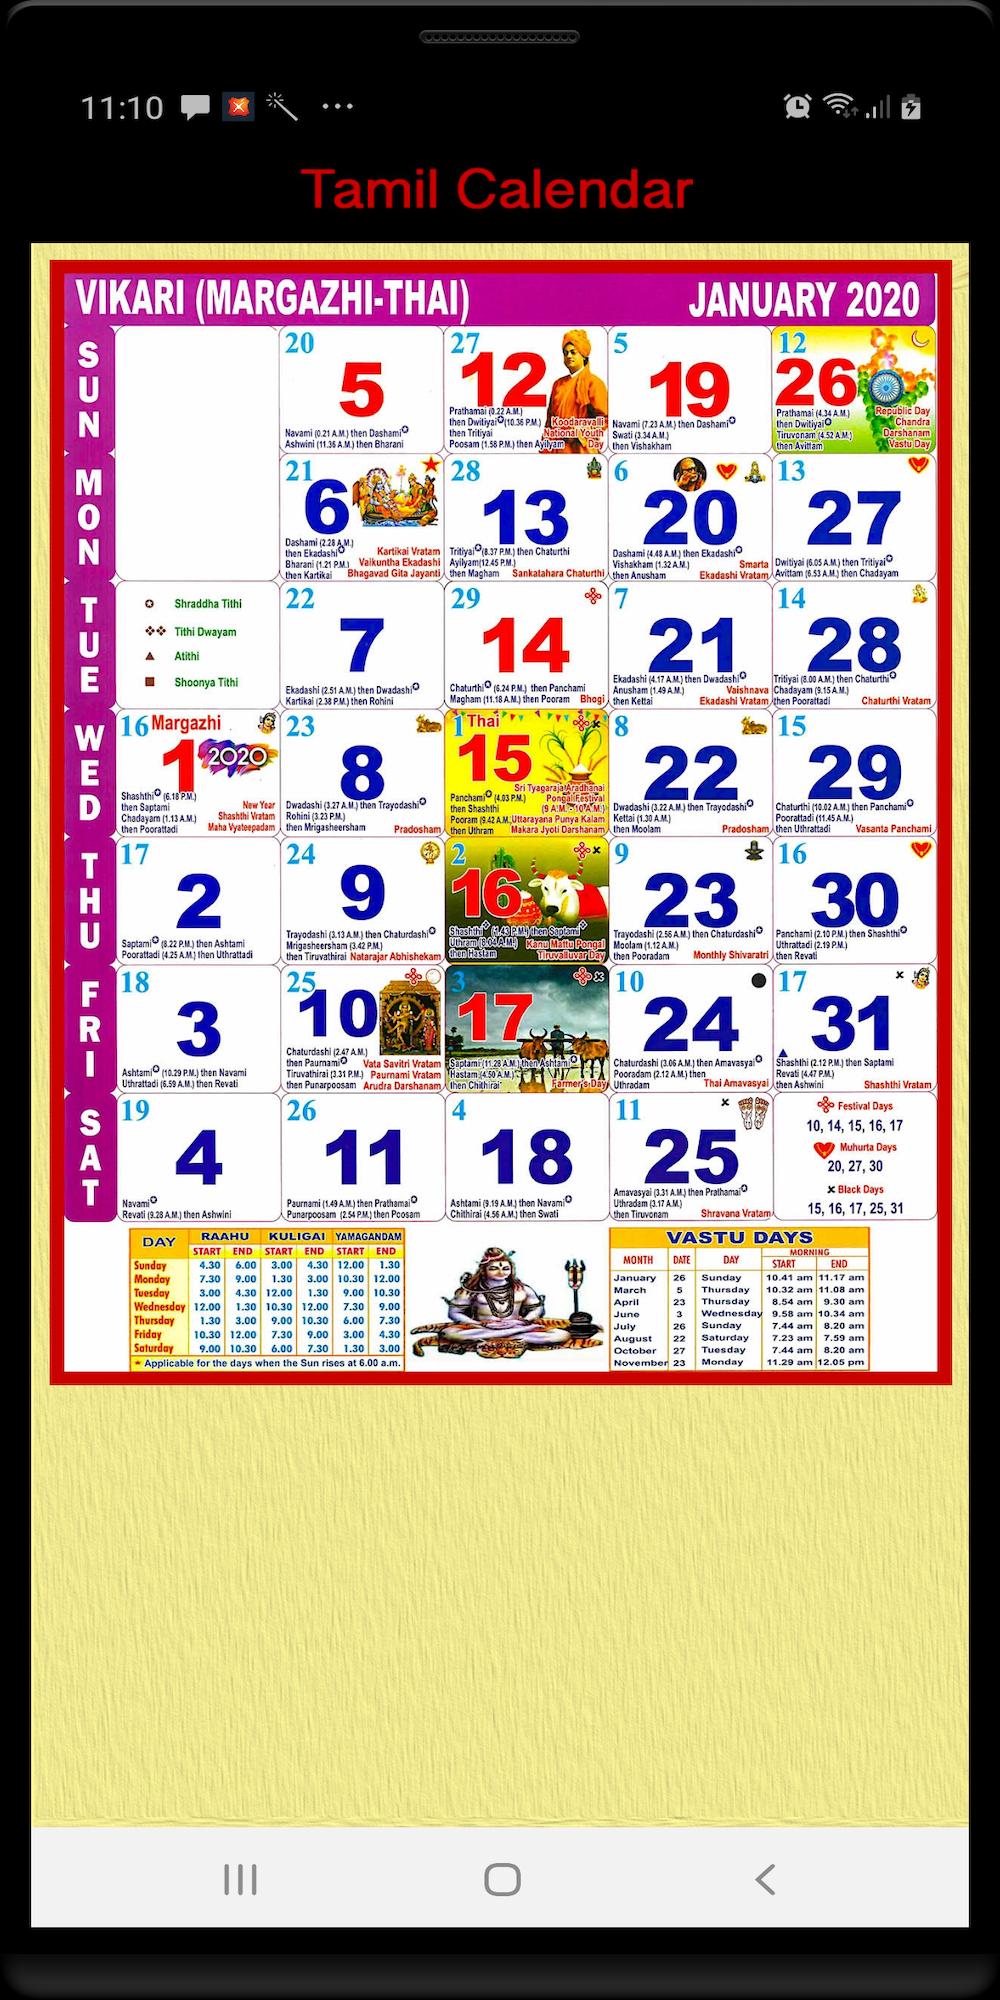 Tamil Calendar English 2020 for Android - APK Download